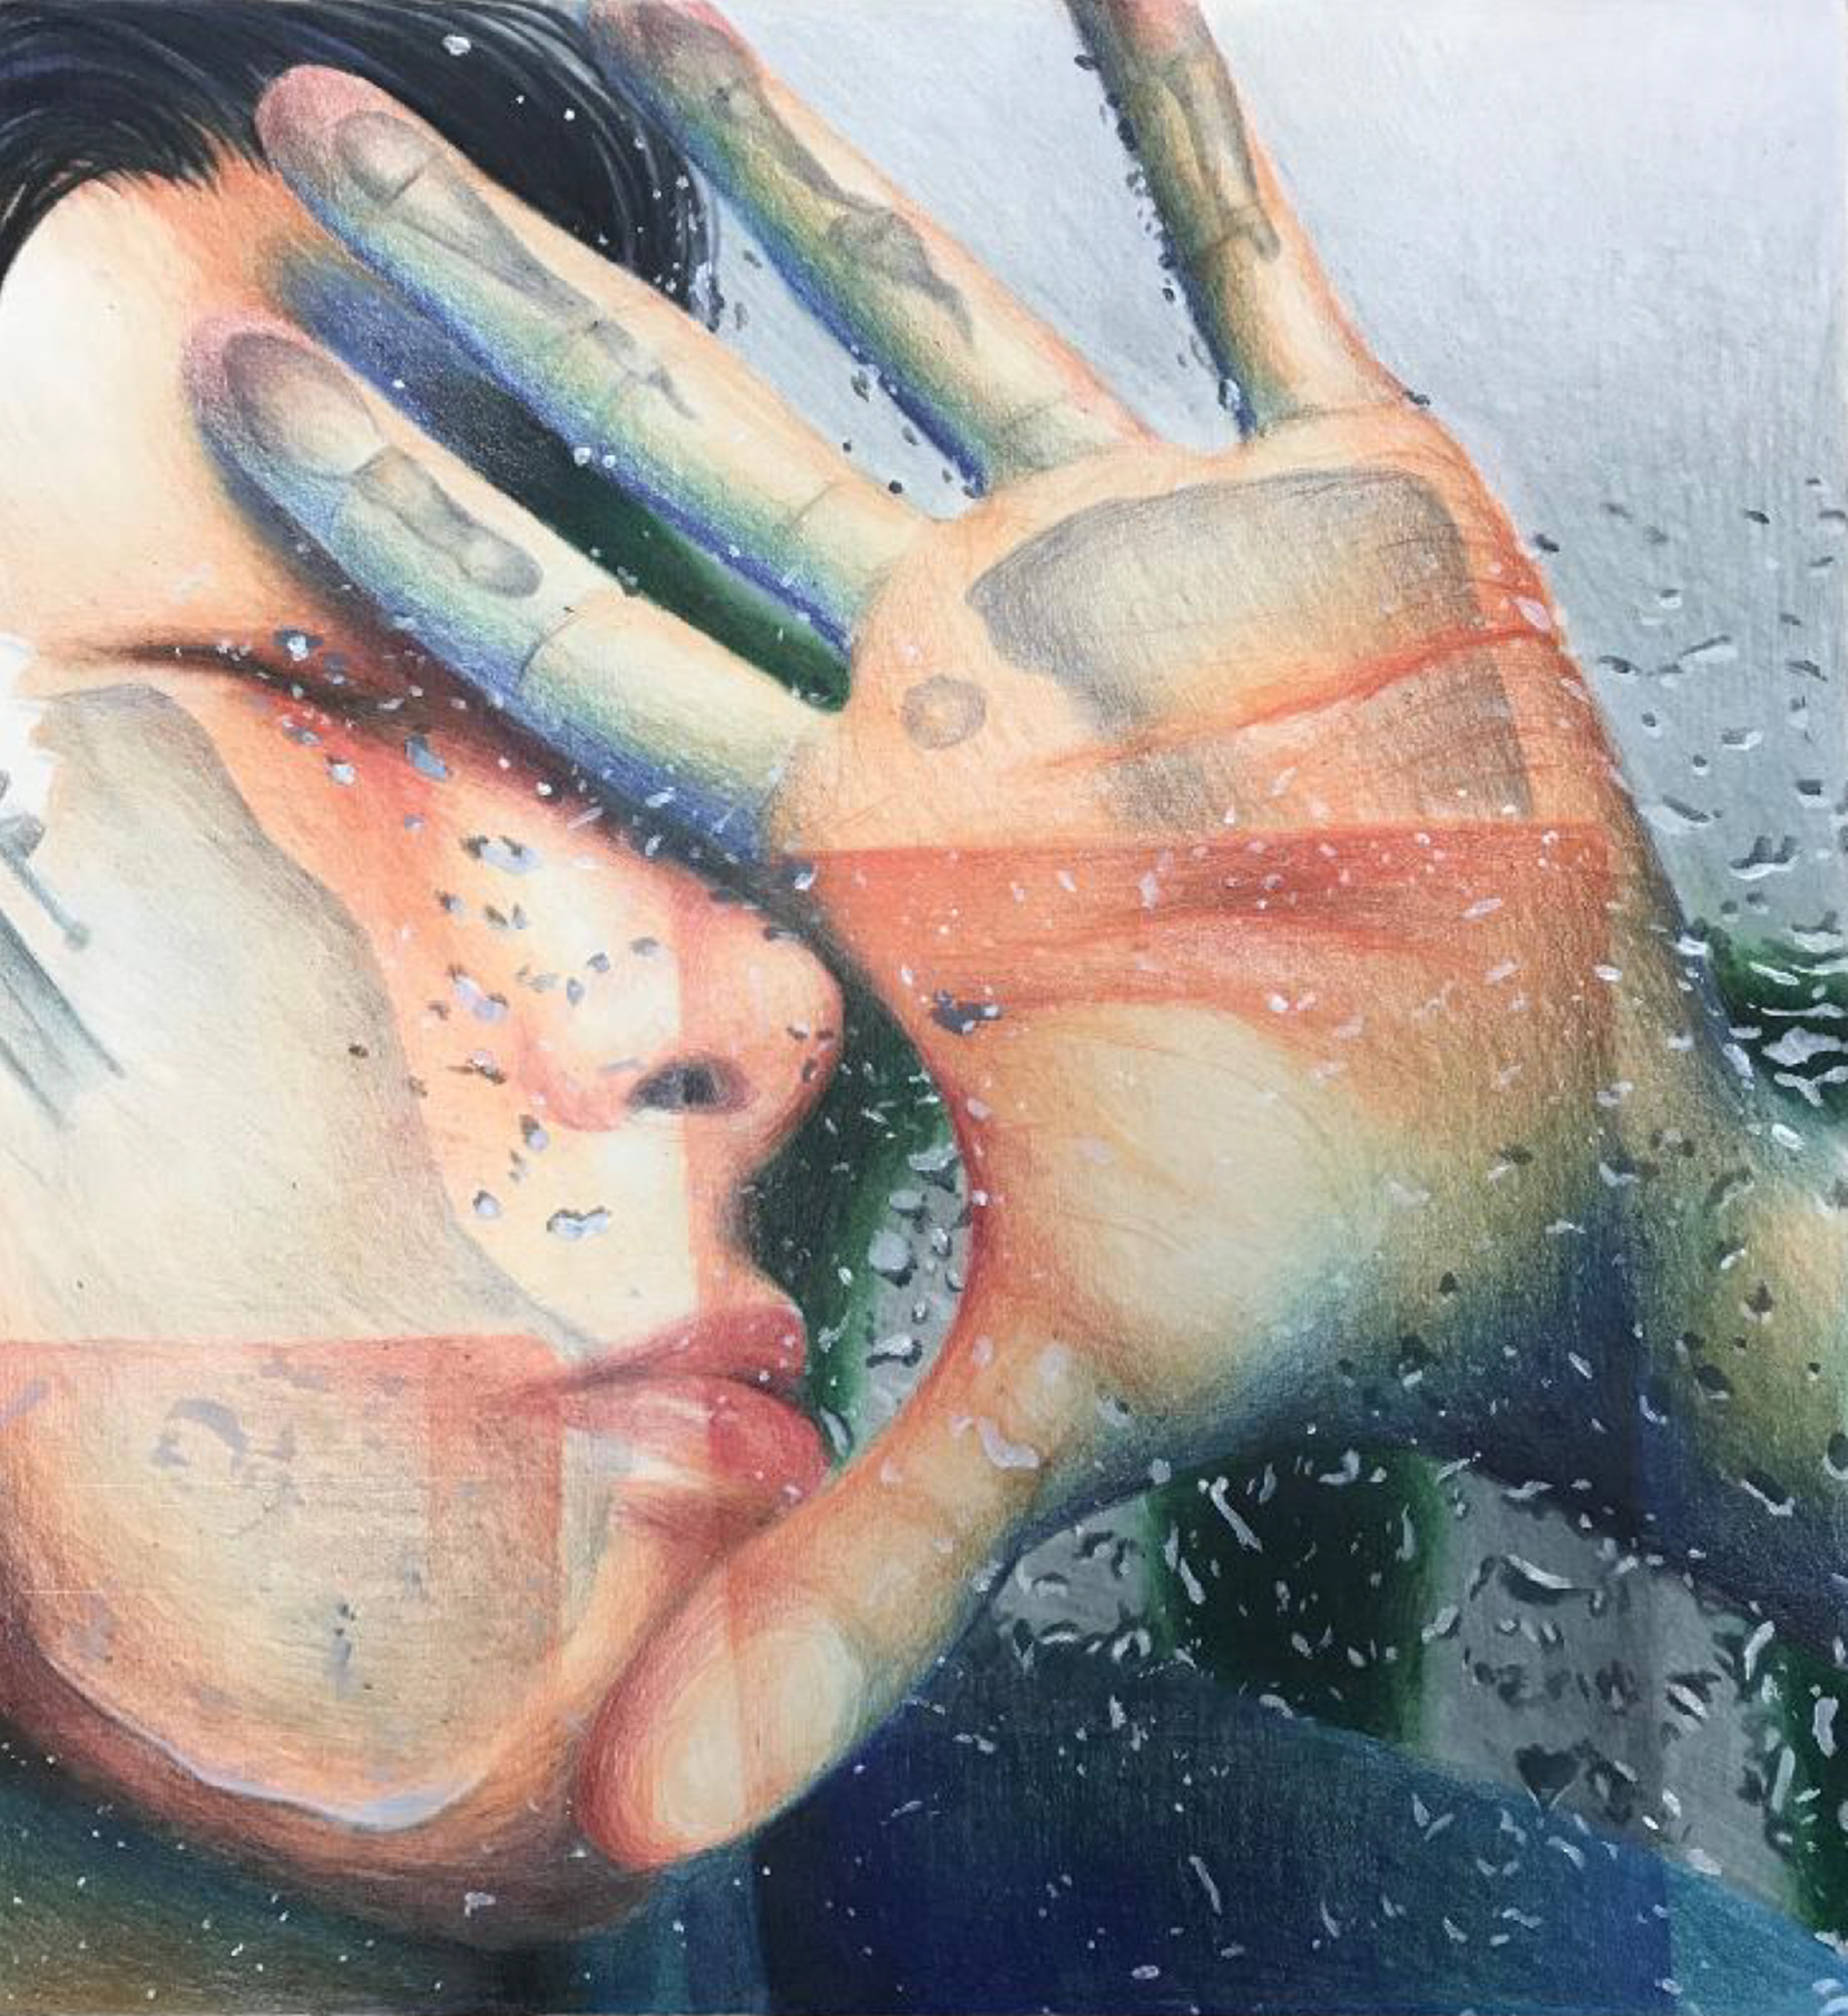 Painting of a young woman's face and hand smooshed against a pane of wet glass